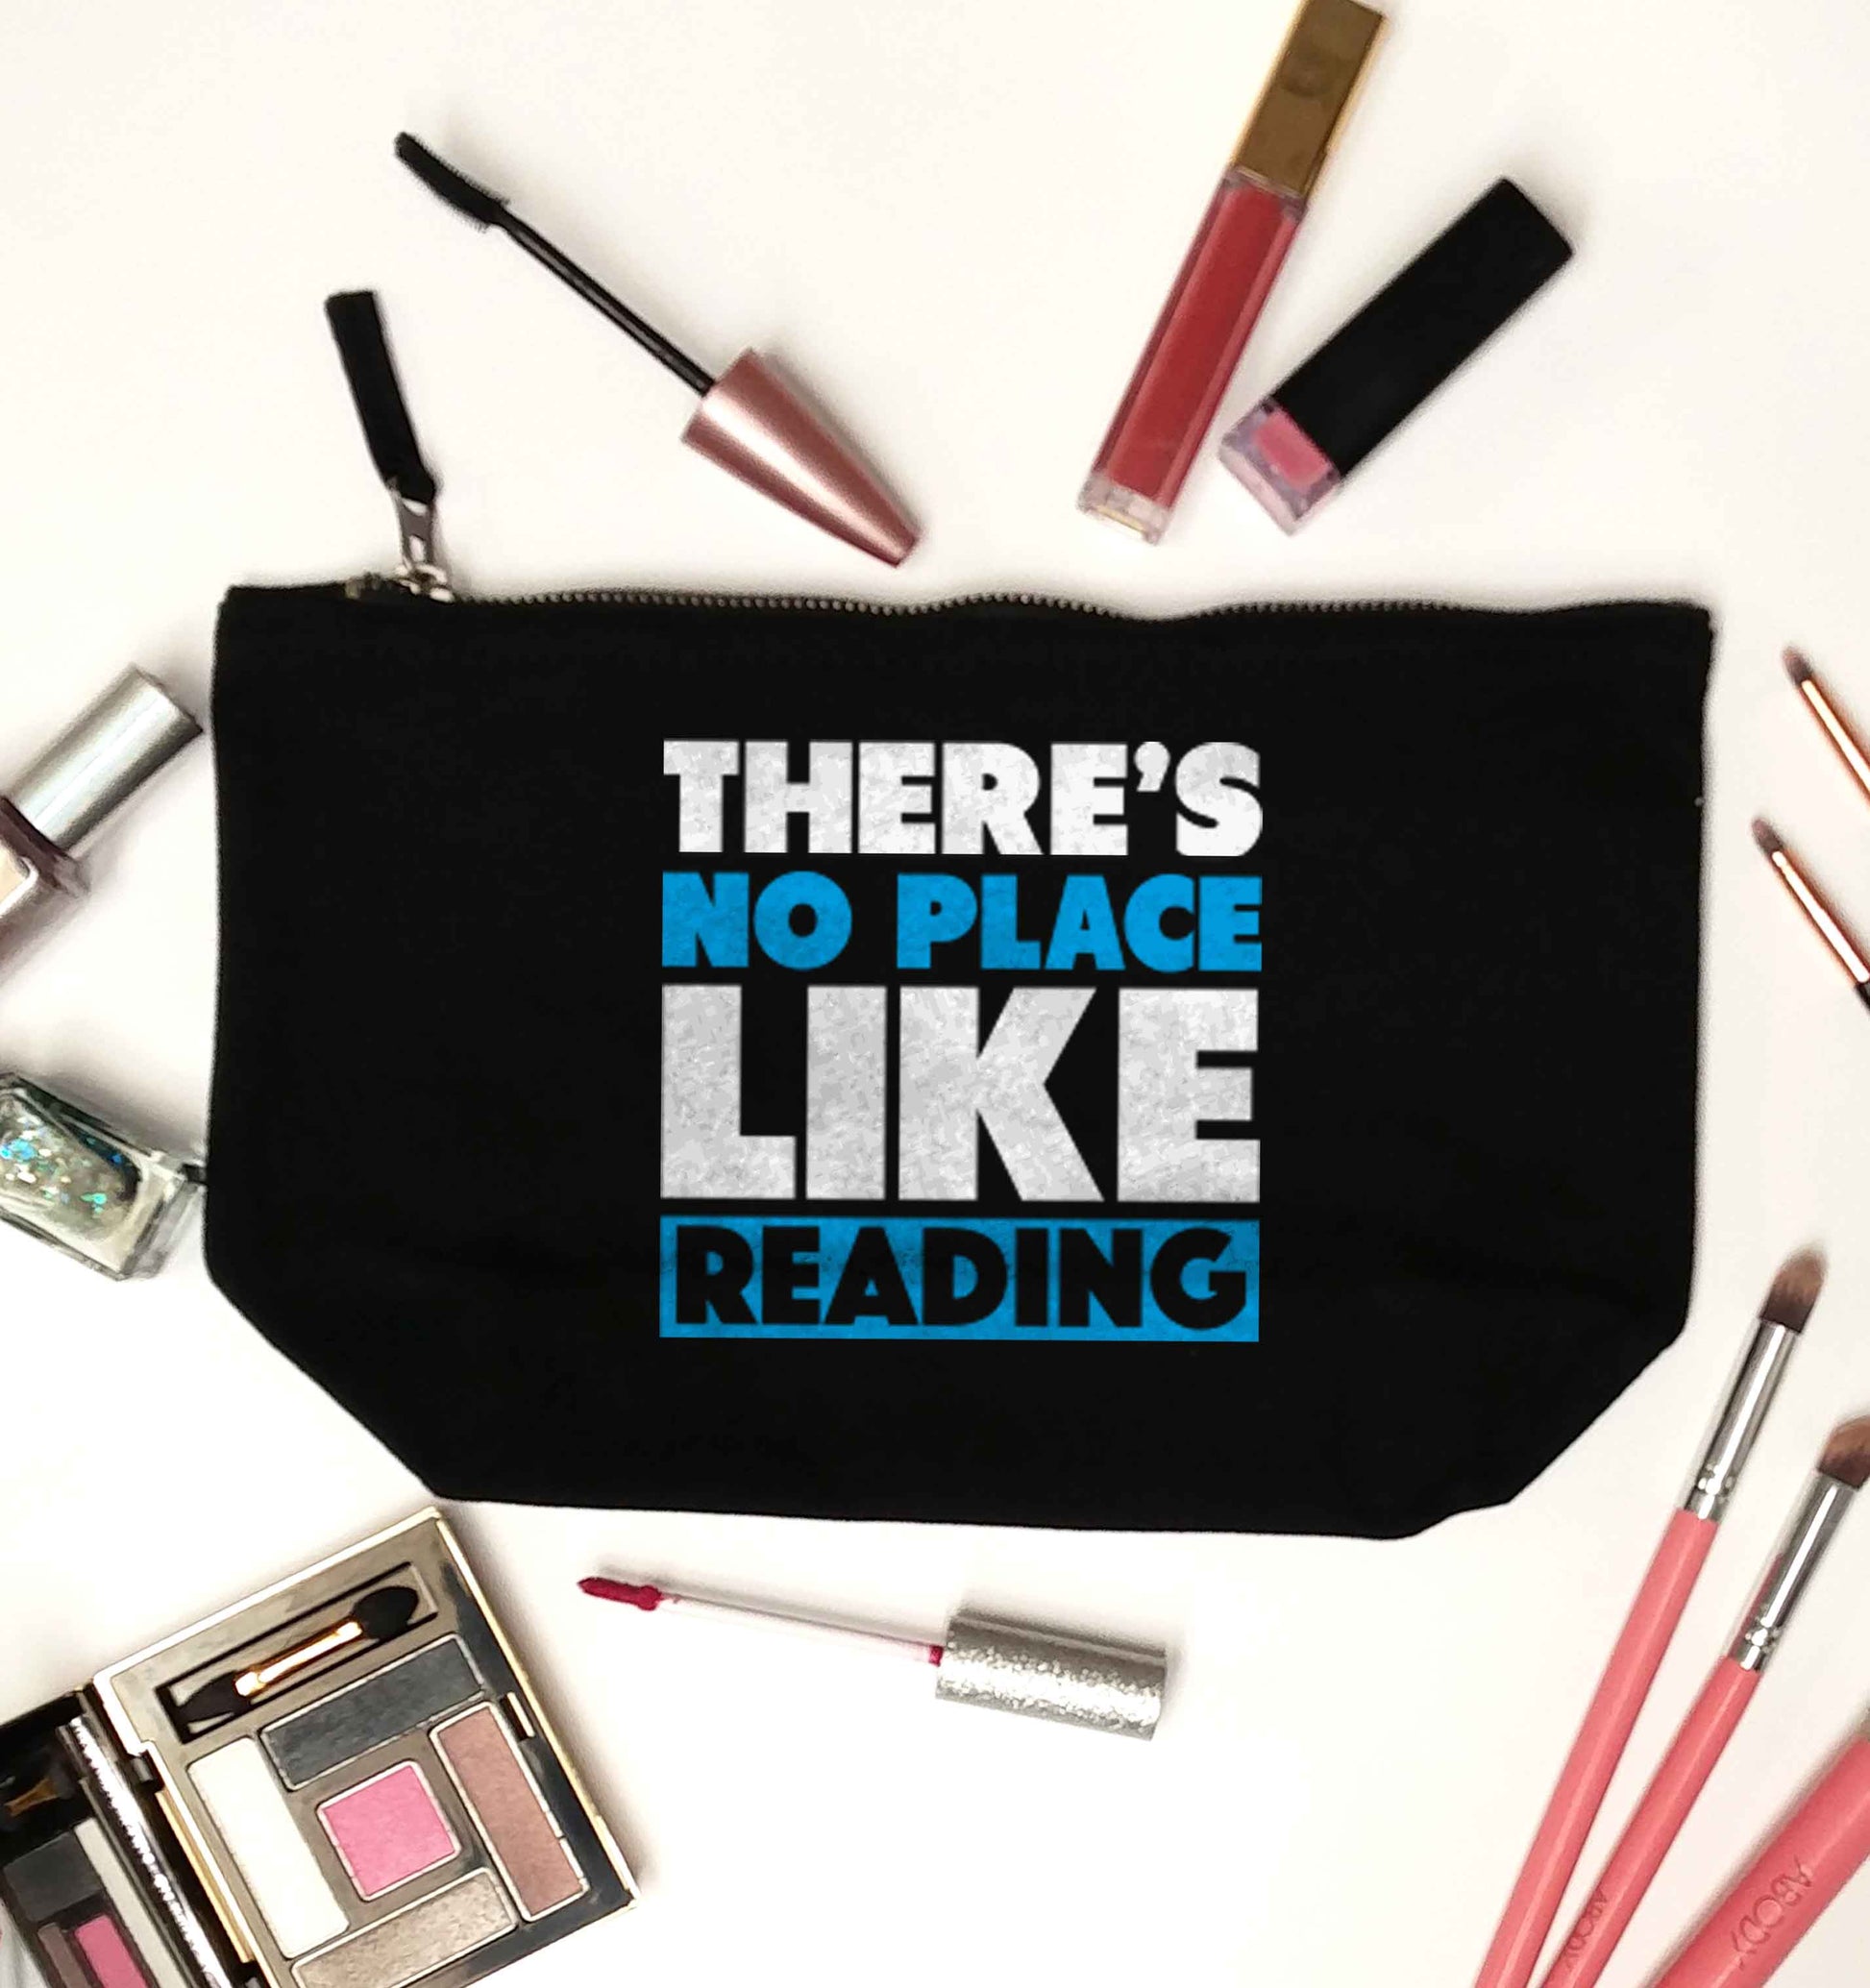 There's no place like Readingblack makeup bag